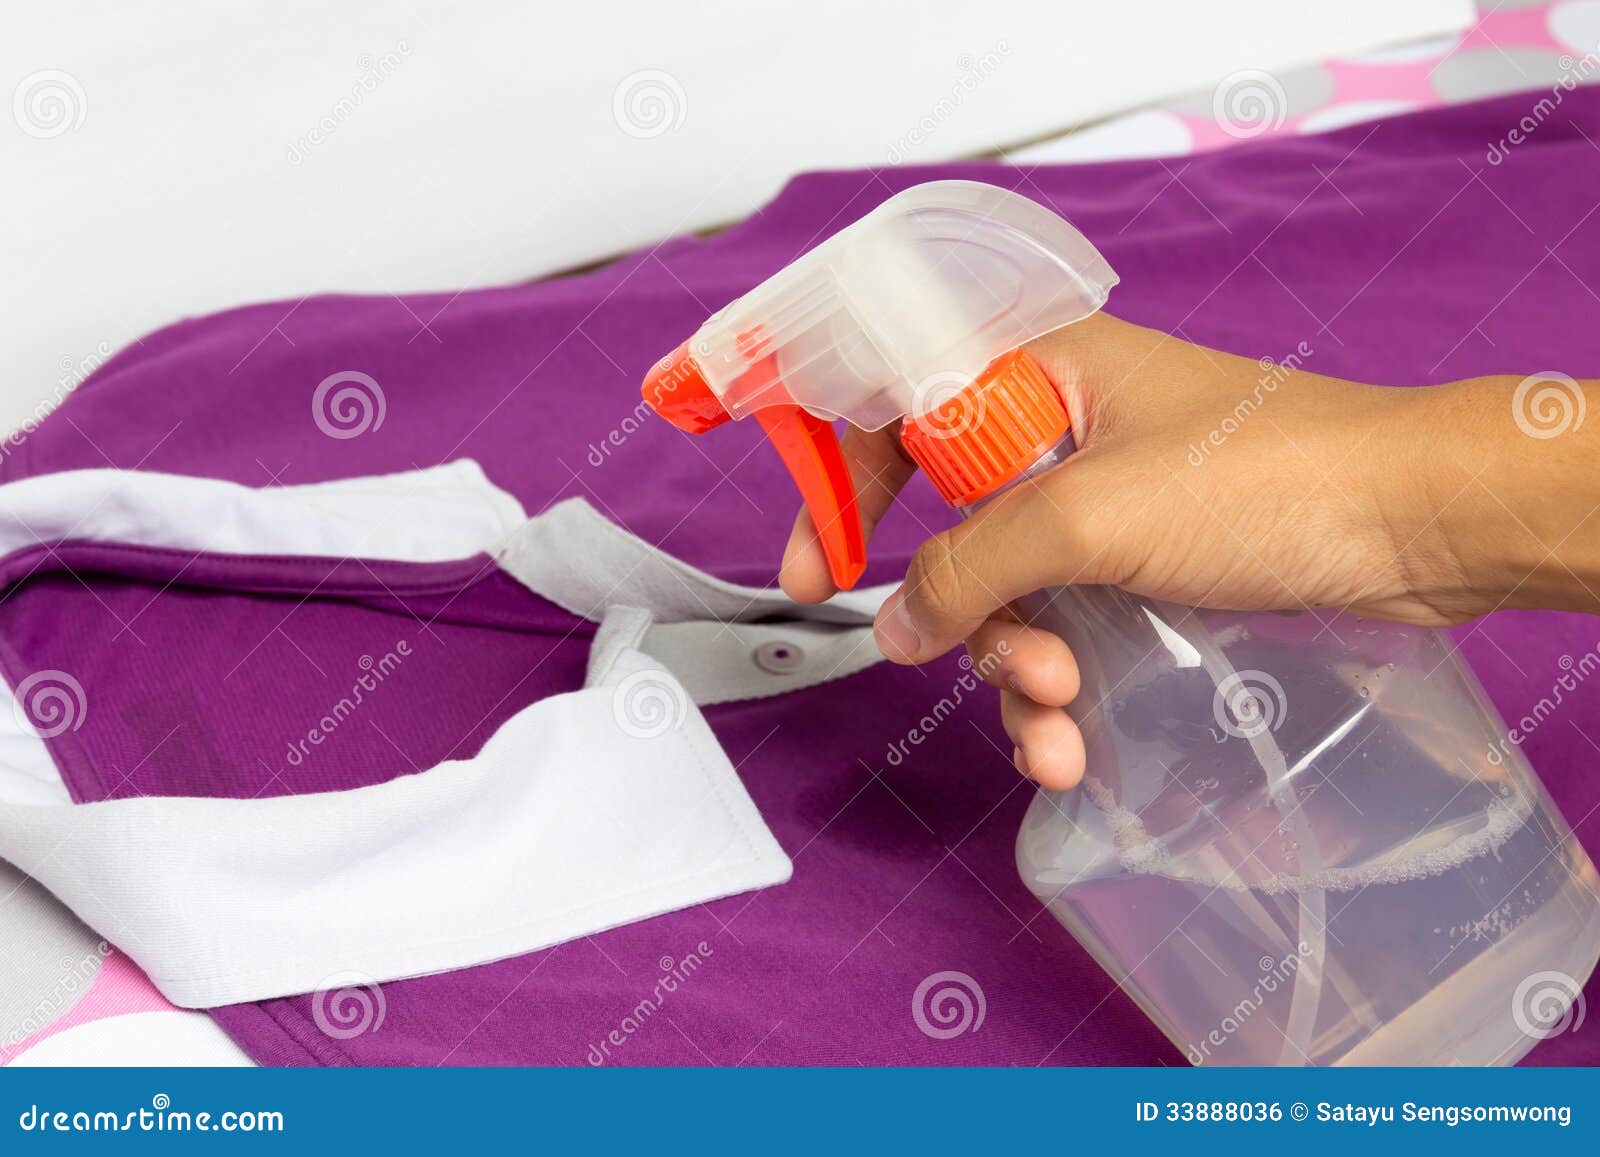 spraying a casual cloth with laundry detergent in spray bottle